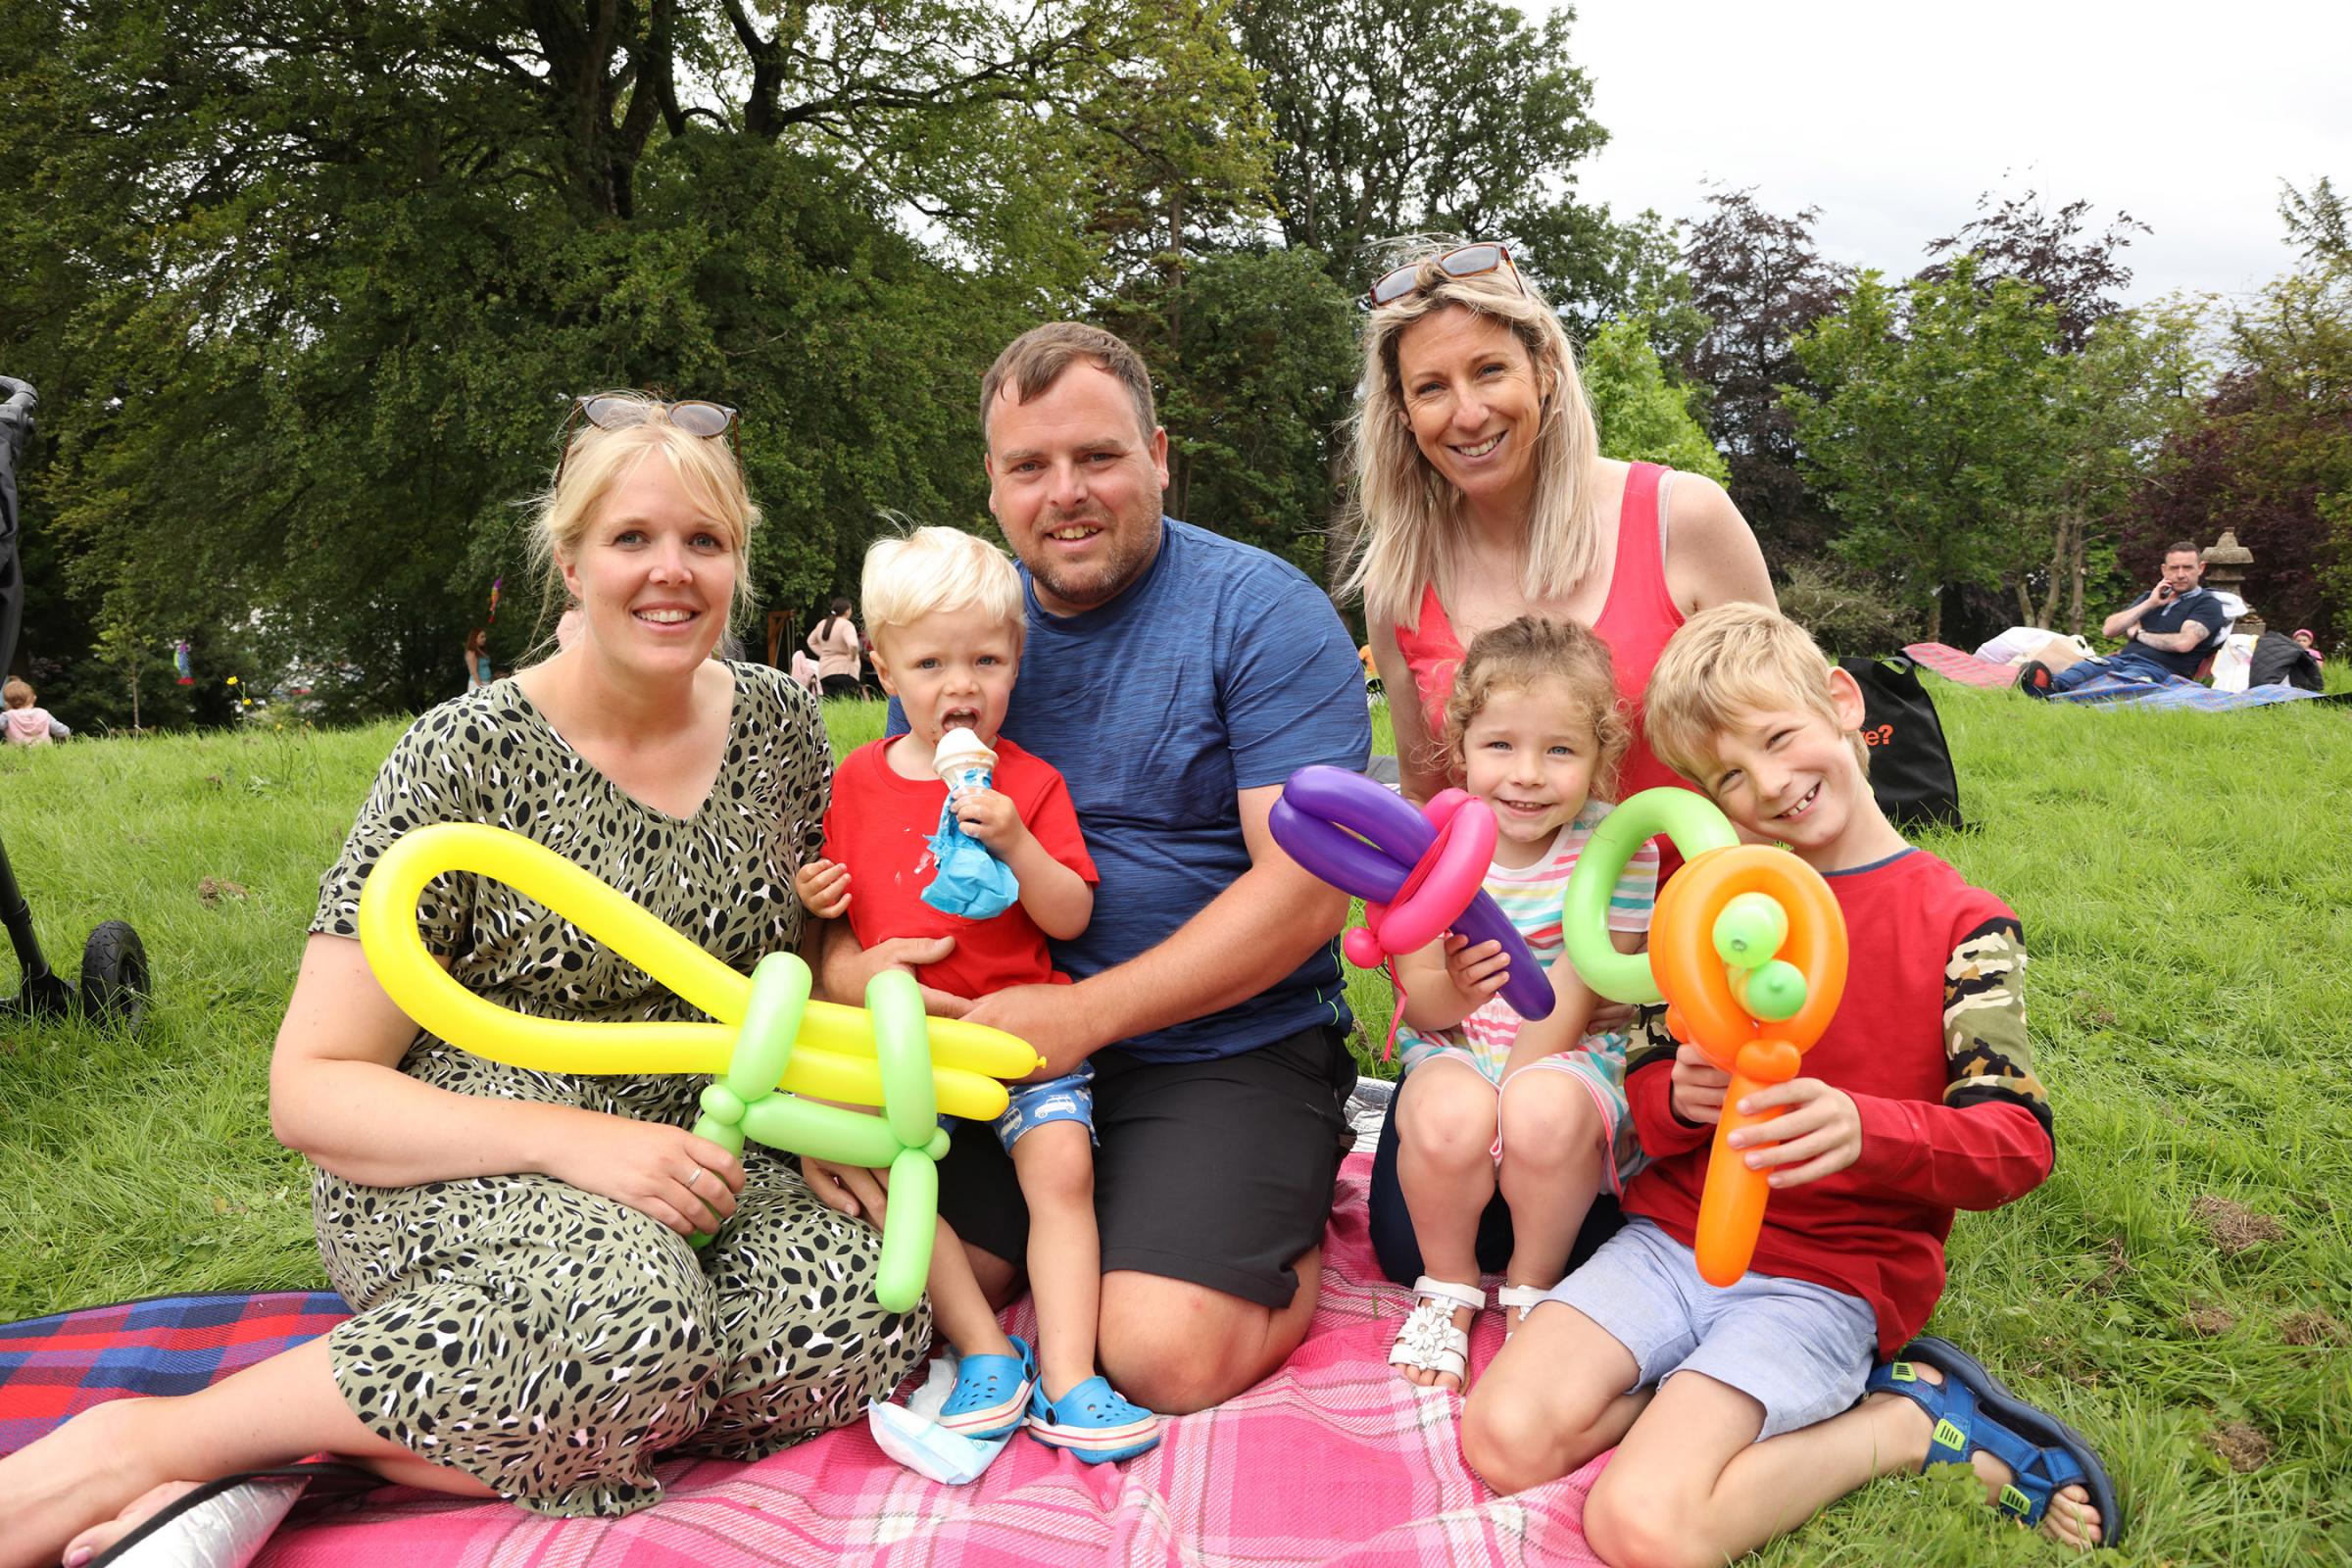 Great fun had by all at Forthill Park picnic